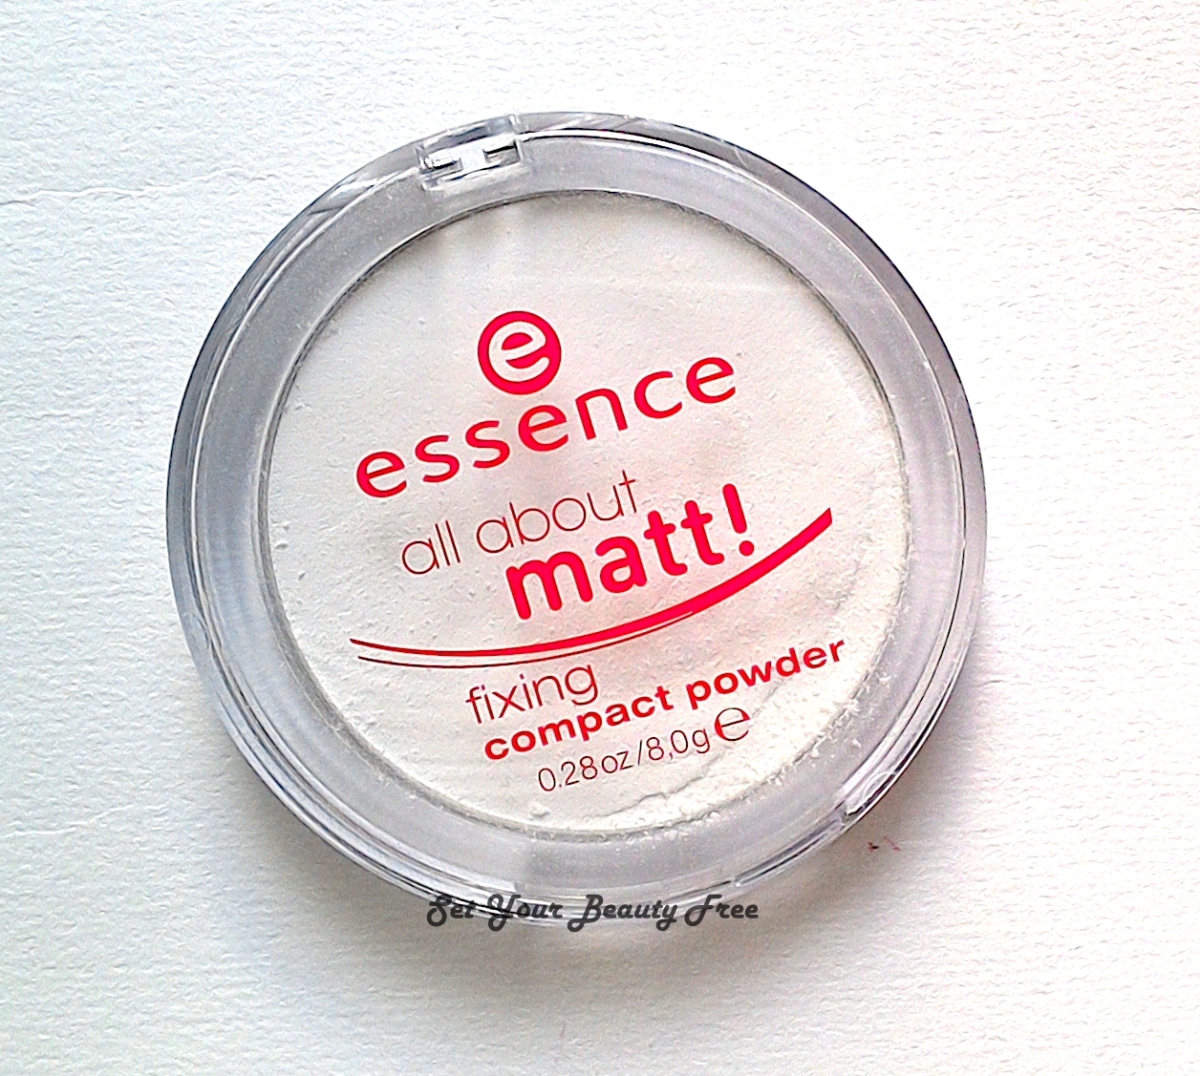 Beauty Powder Essence [Review] Matt! – About Your Fixing Compact Set Free All